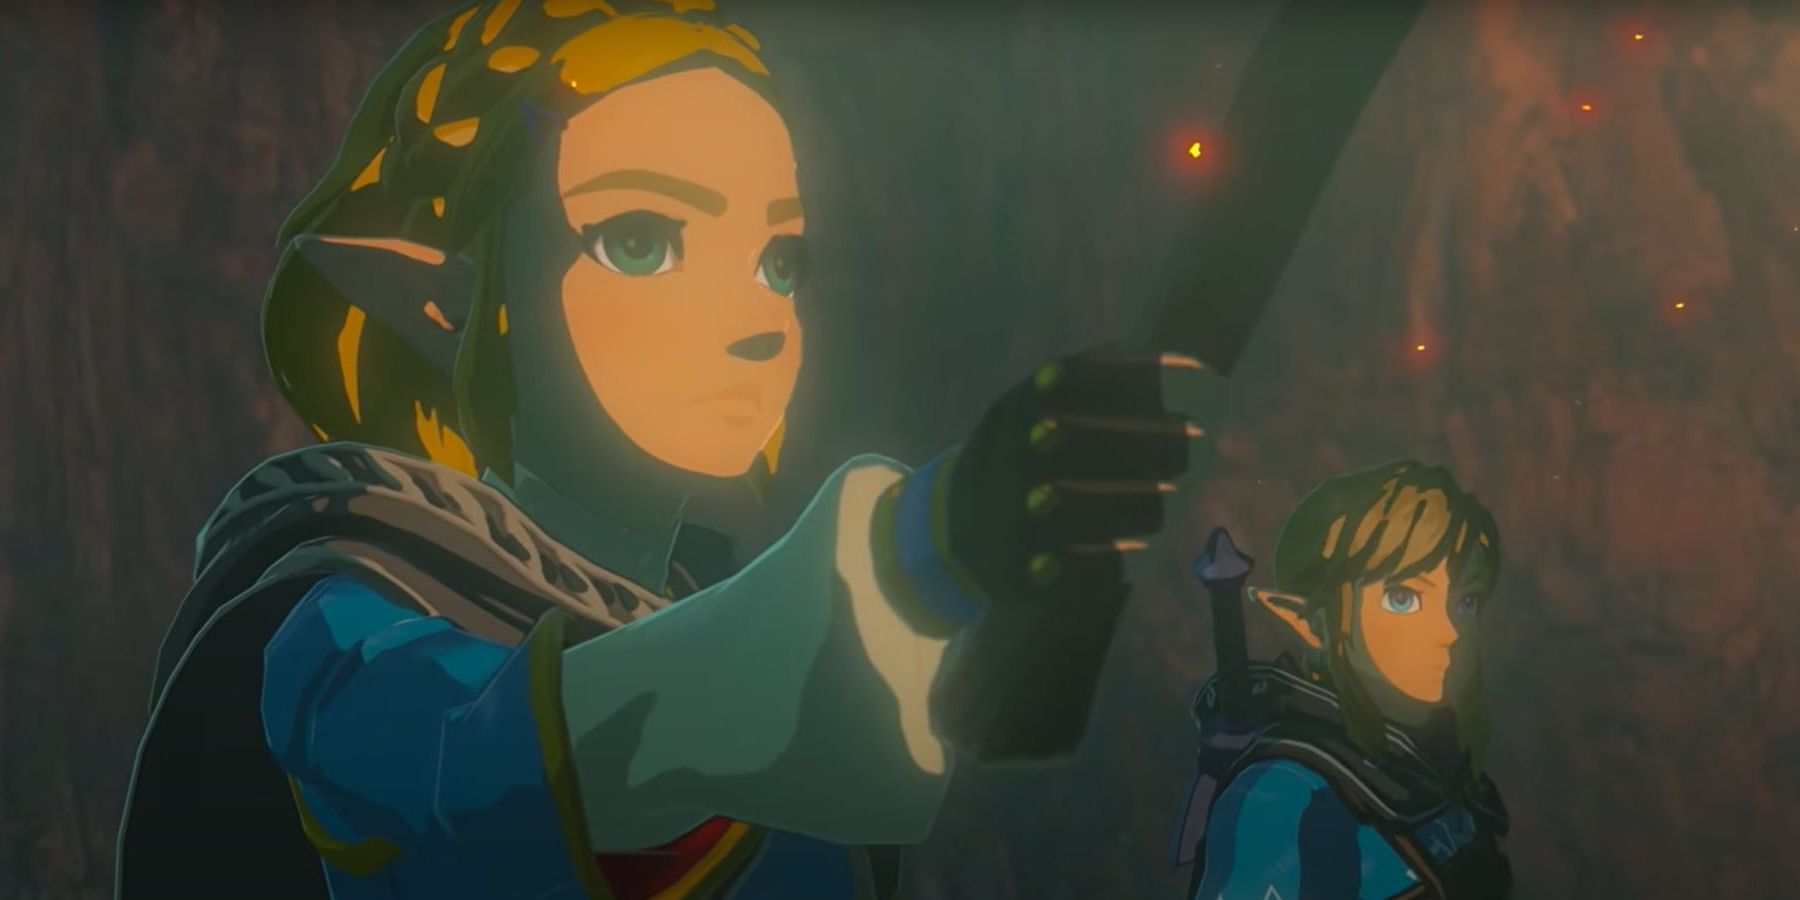 Zelda and Link in a cave in Breath of the Wild.